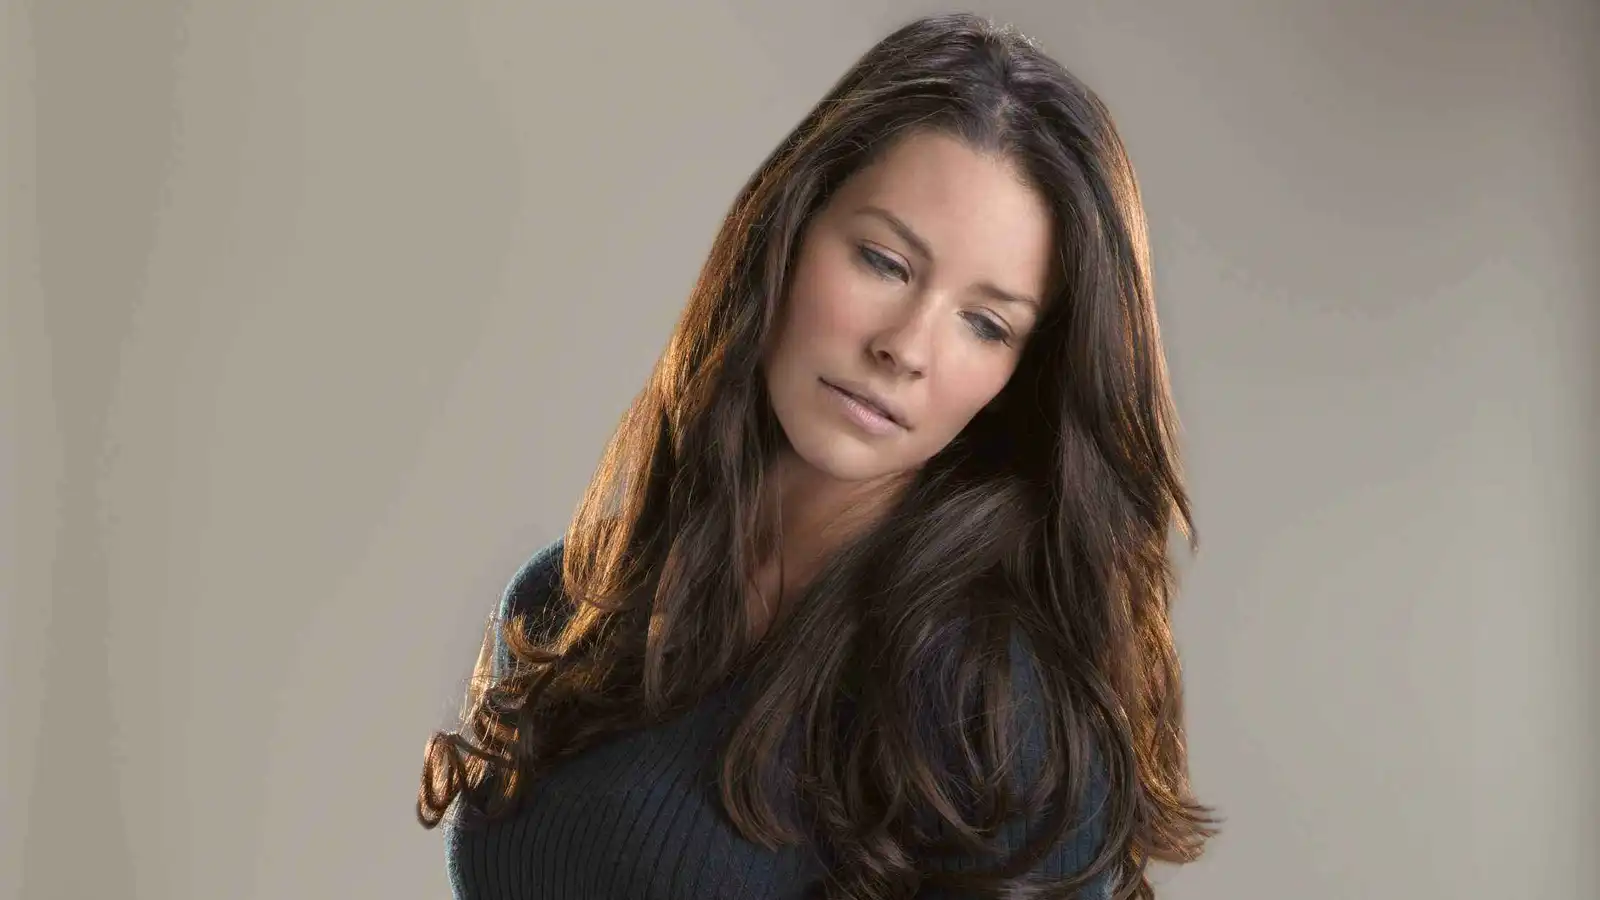 'No more': Evangeline Lilly’s stand against Coerced nude scenes on Lost